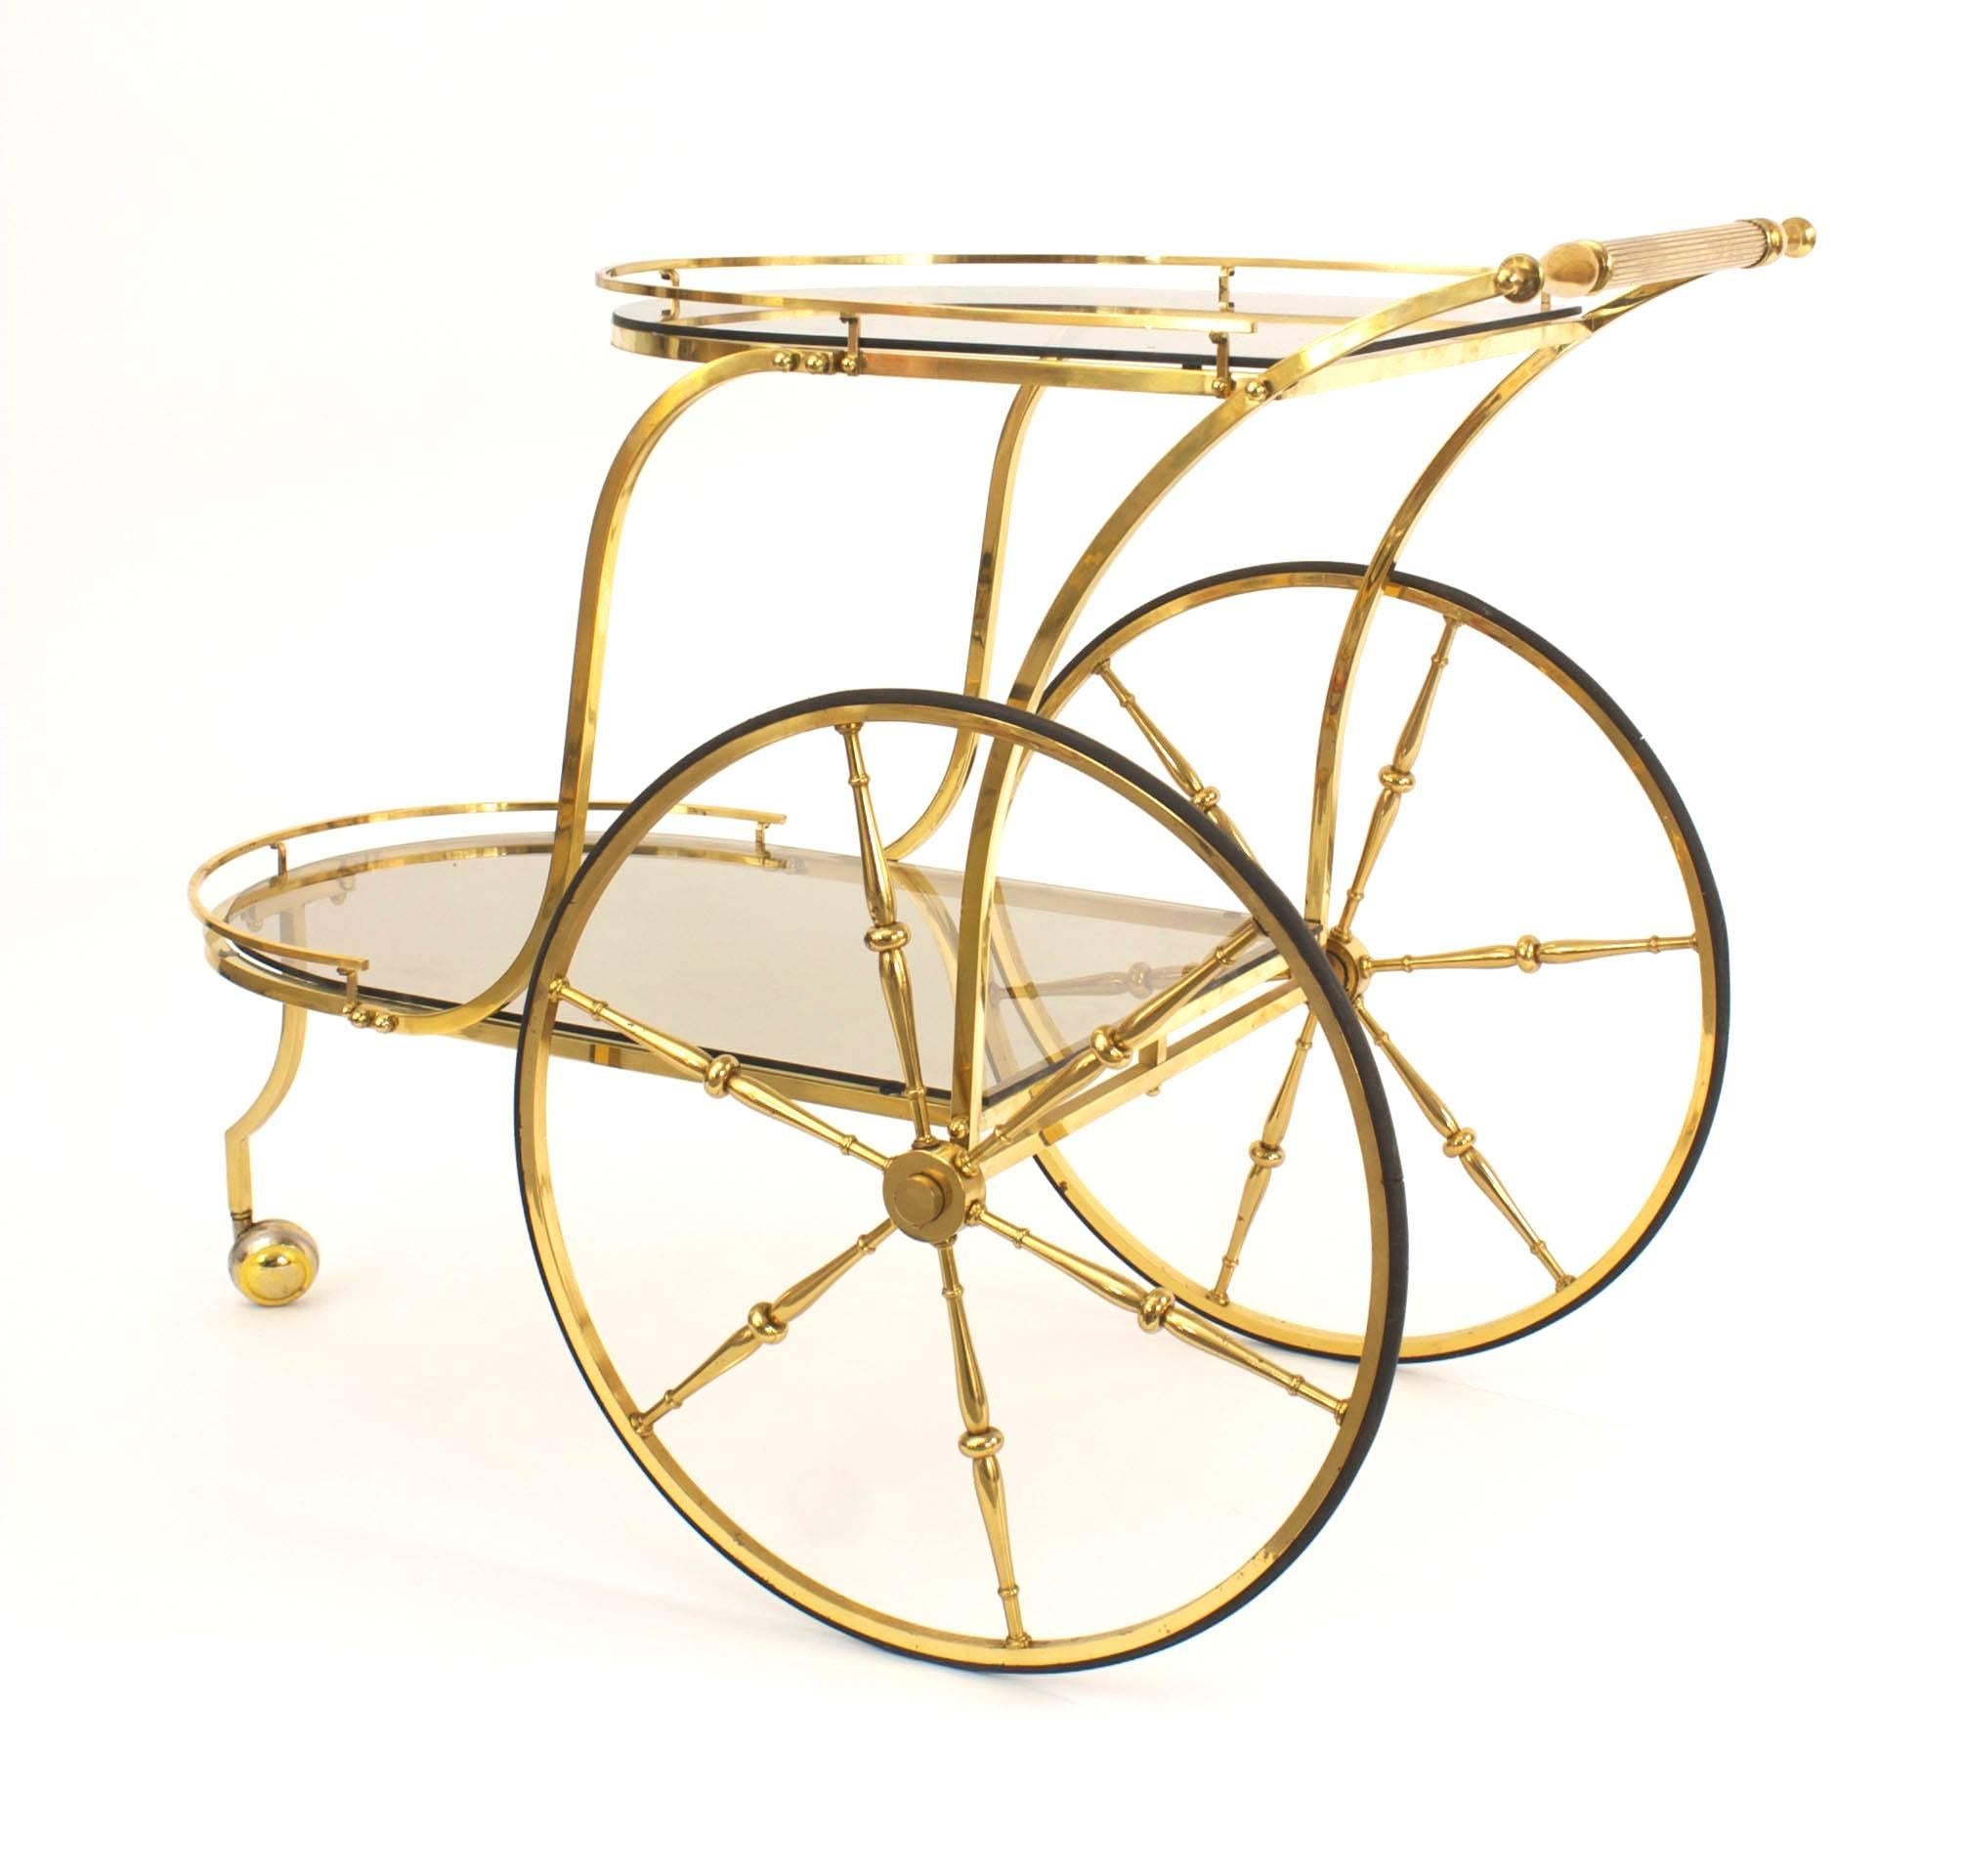 Italian Mid-Century (1950s) brass liquor/drinks trolley bar cart with one small front and two large back brass wheels and having a smoked glass top and shelf.